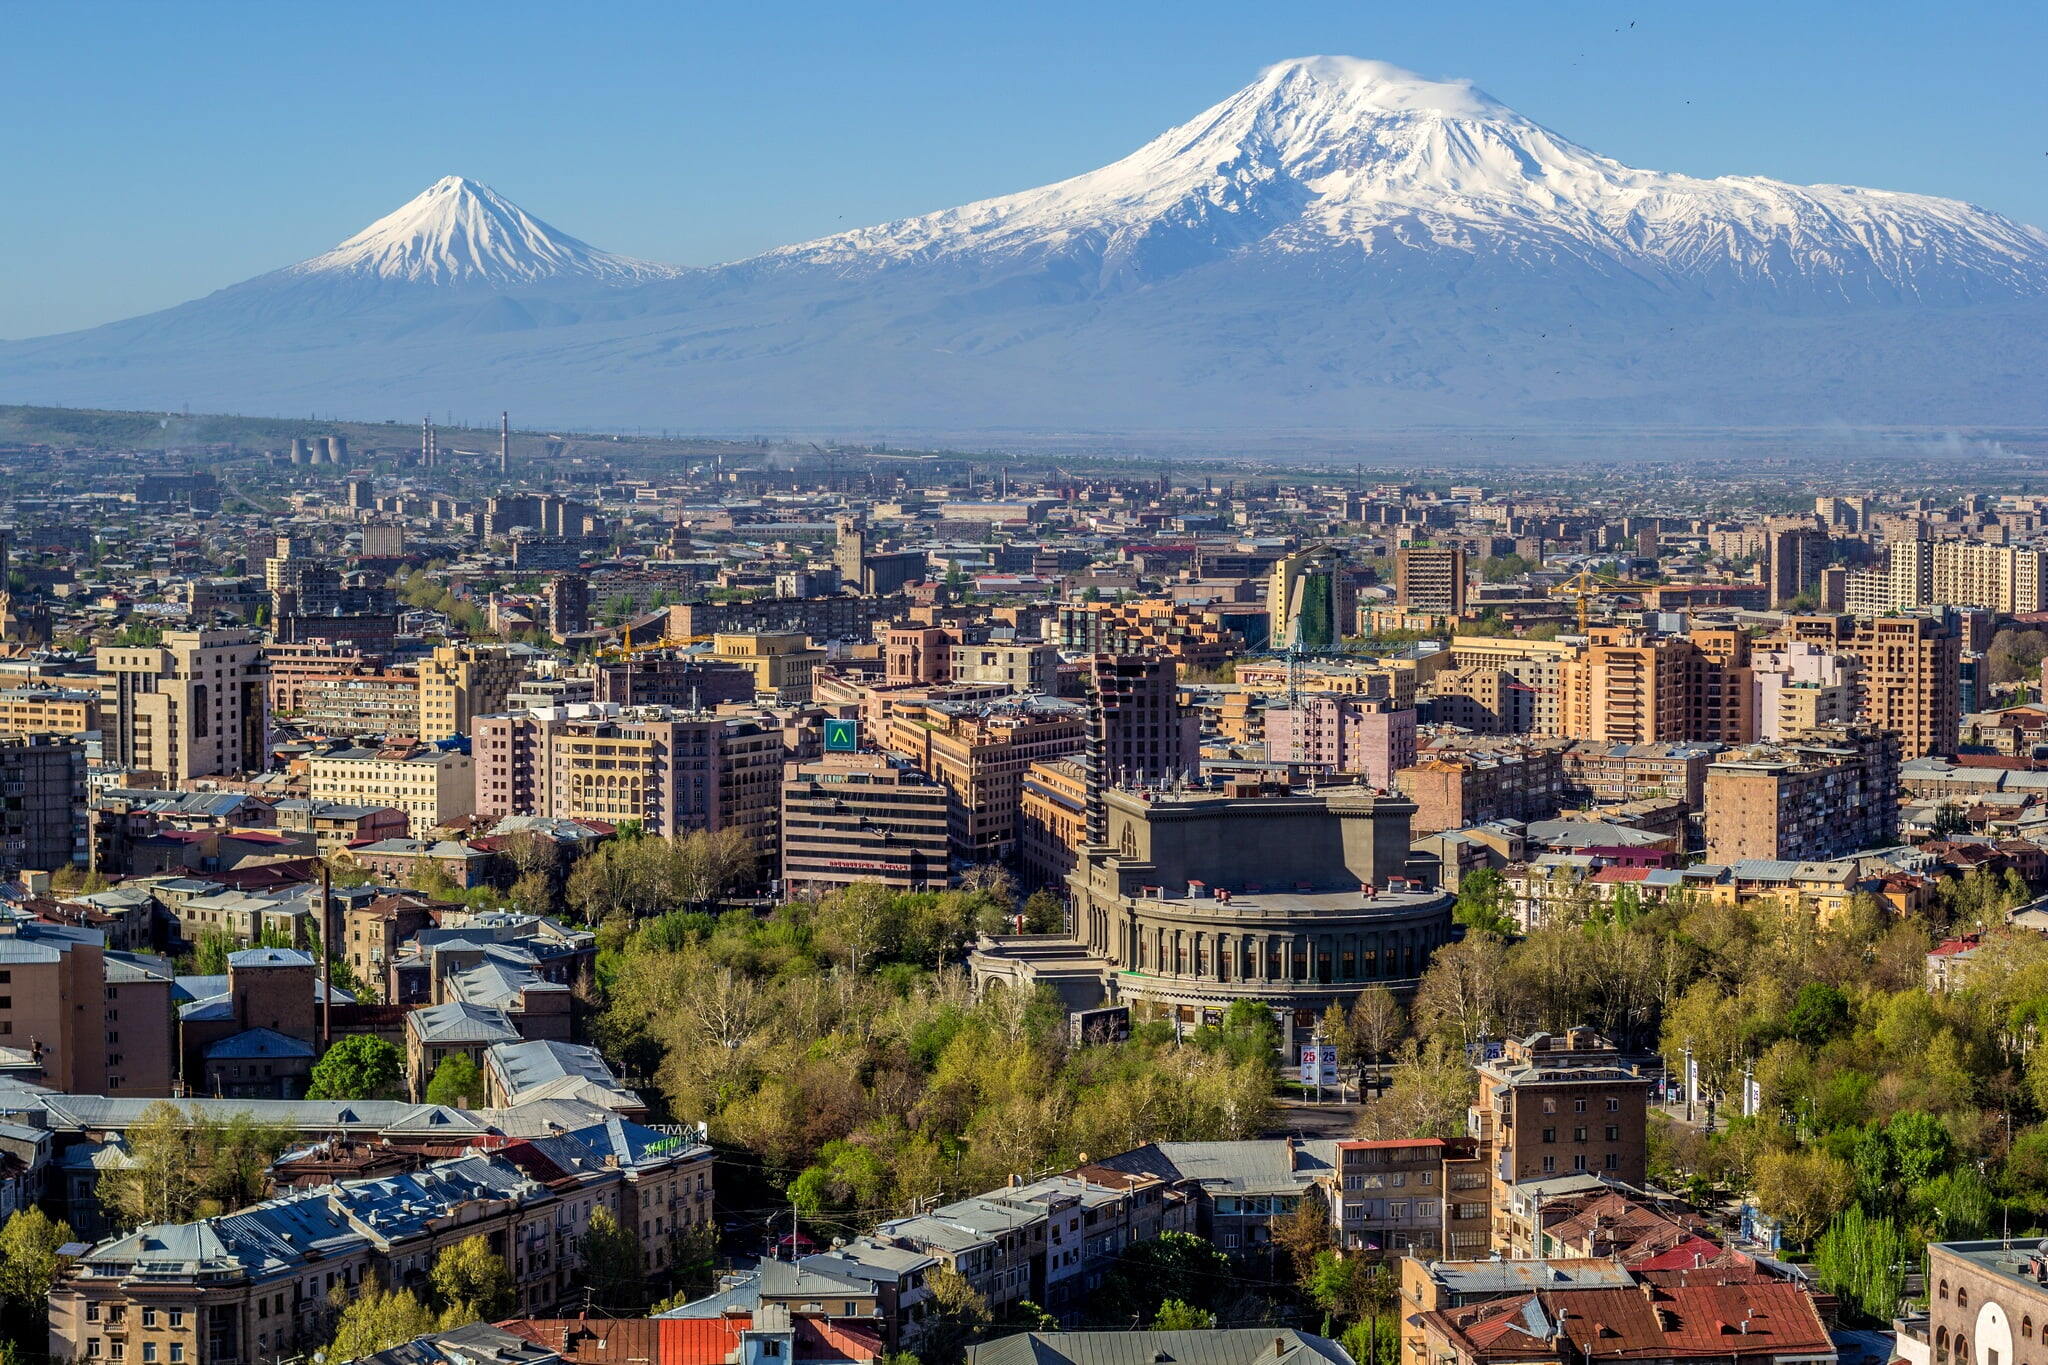 Jerevan - Mount Ararat and the Yerevan skyline. The Opera house is visible in the center.